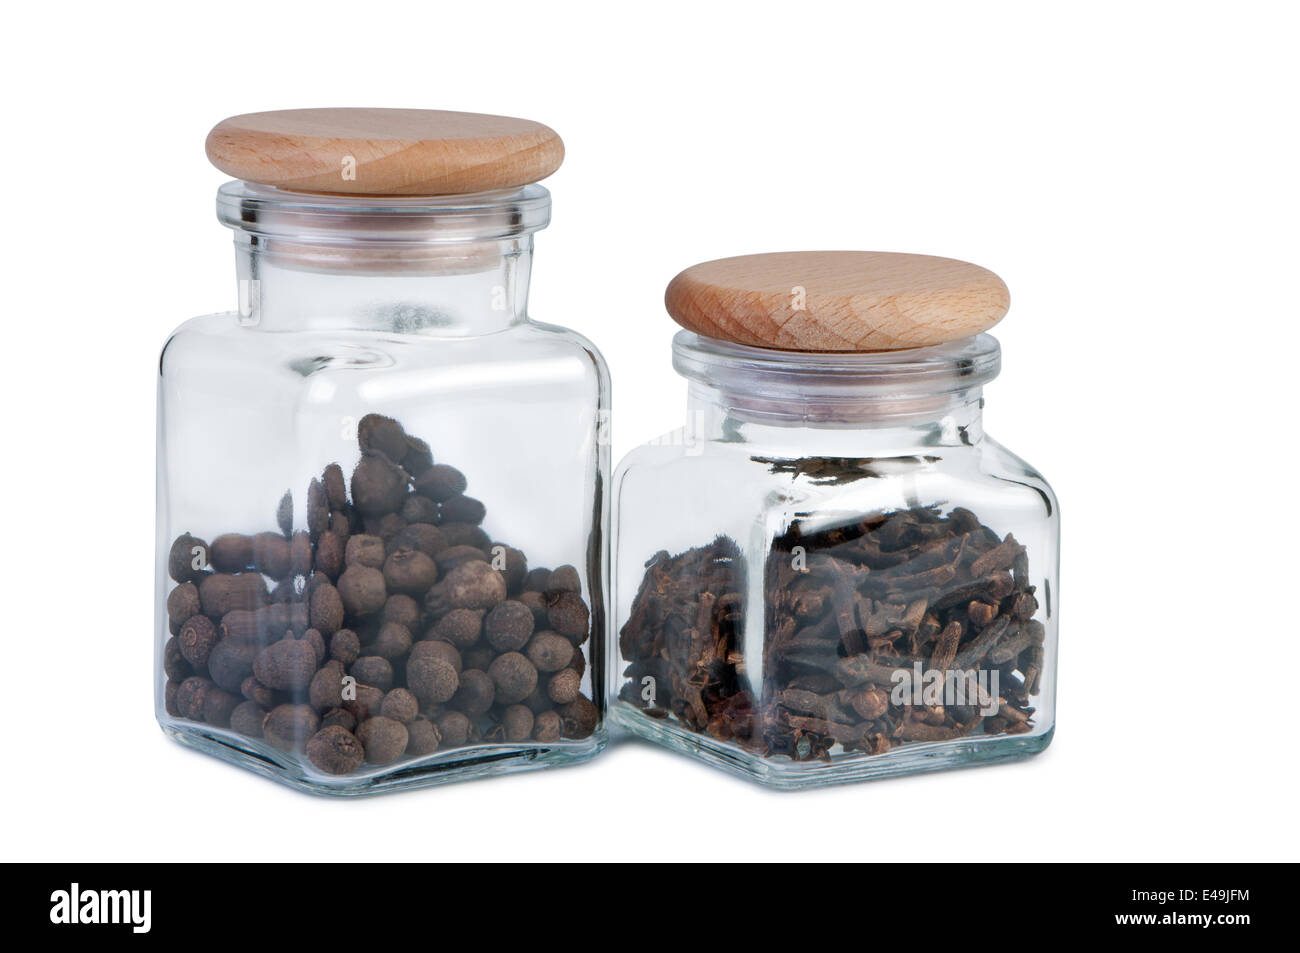 Two Jars of Spices on White Stock Photo